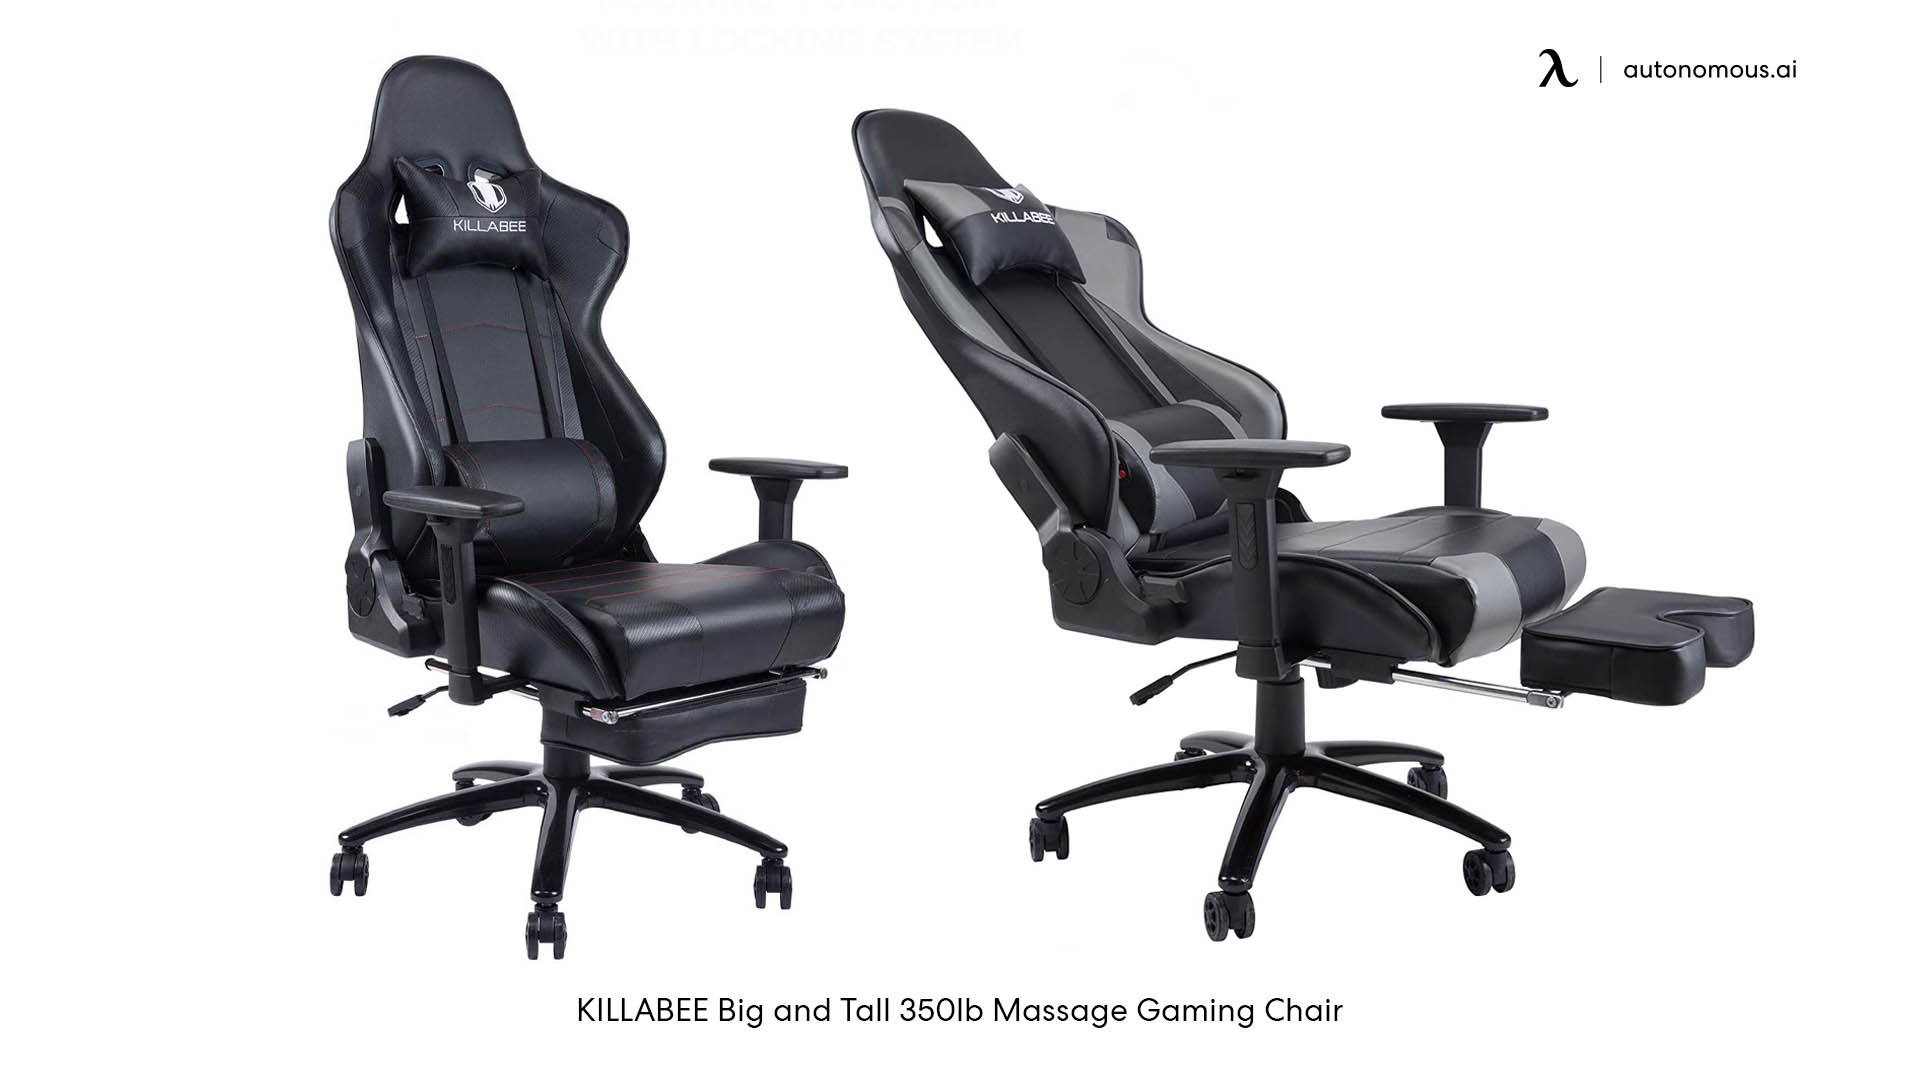 The Big and Tall Massage Gaming Chair